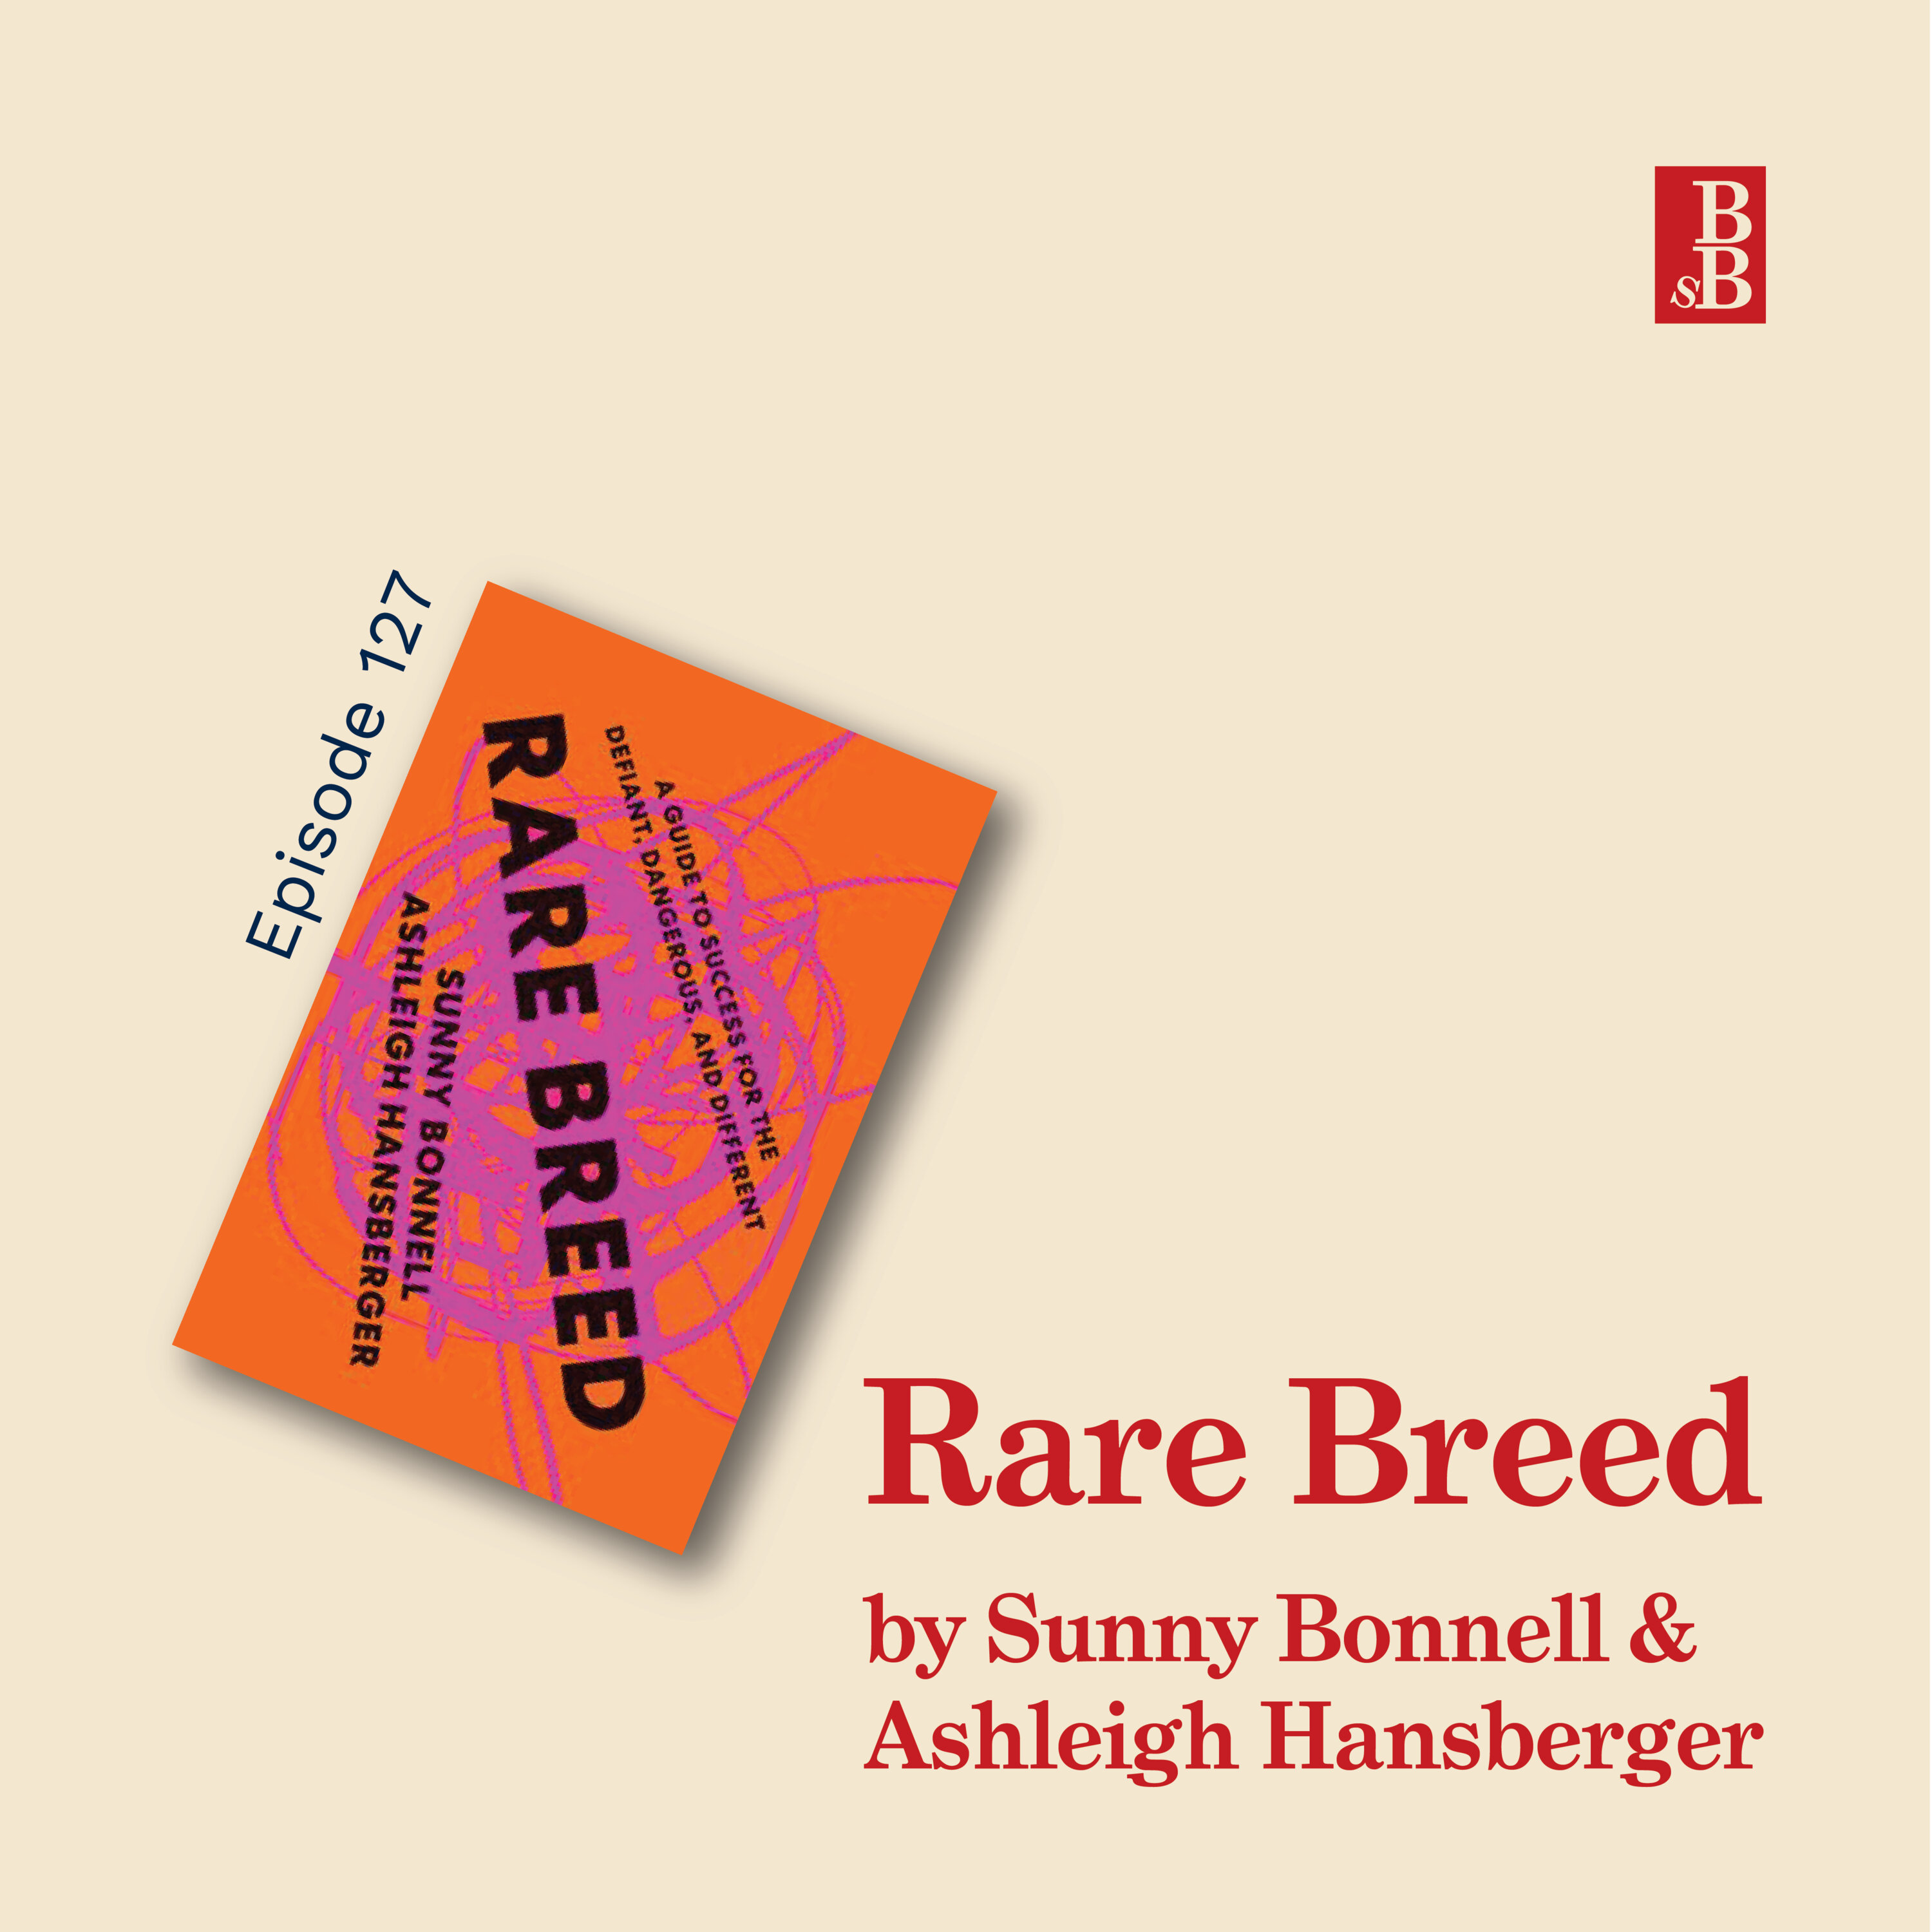 Rare Breed by Sunny Bonnell and Ashleigh Hansberger: the seven traits you need to be a change maker